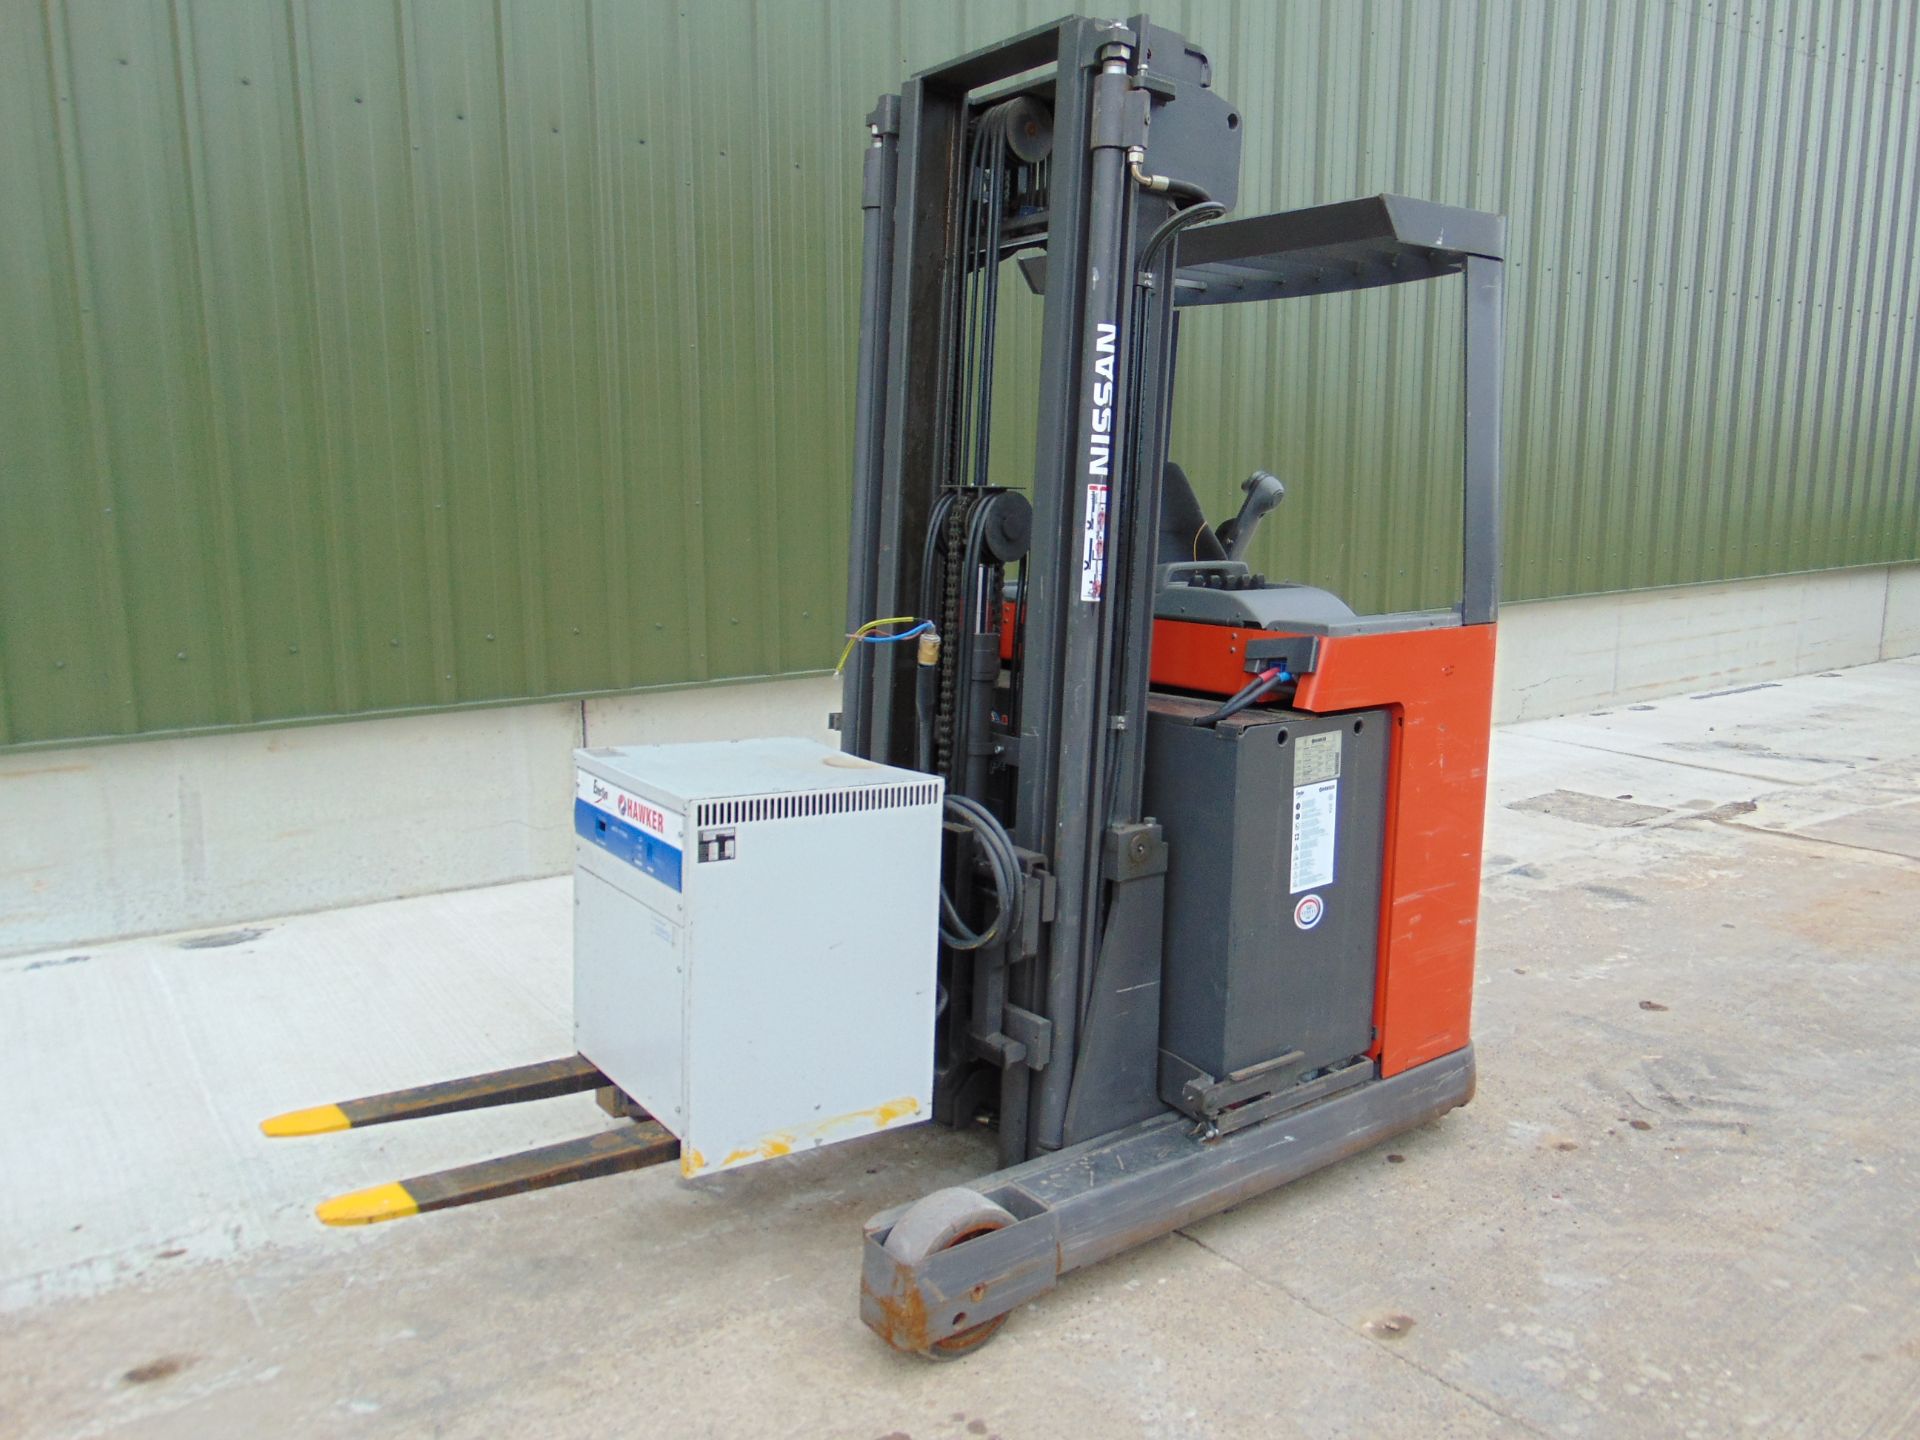 Nissan UNS-200 Electric Reach Fork Lift w/ Battery Charger Unit 2283 hrs - Image 4 of 31